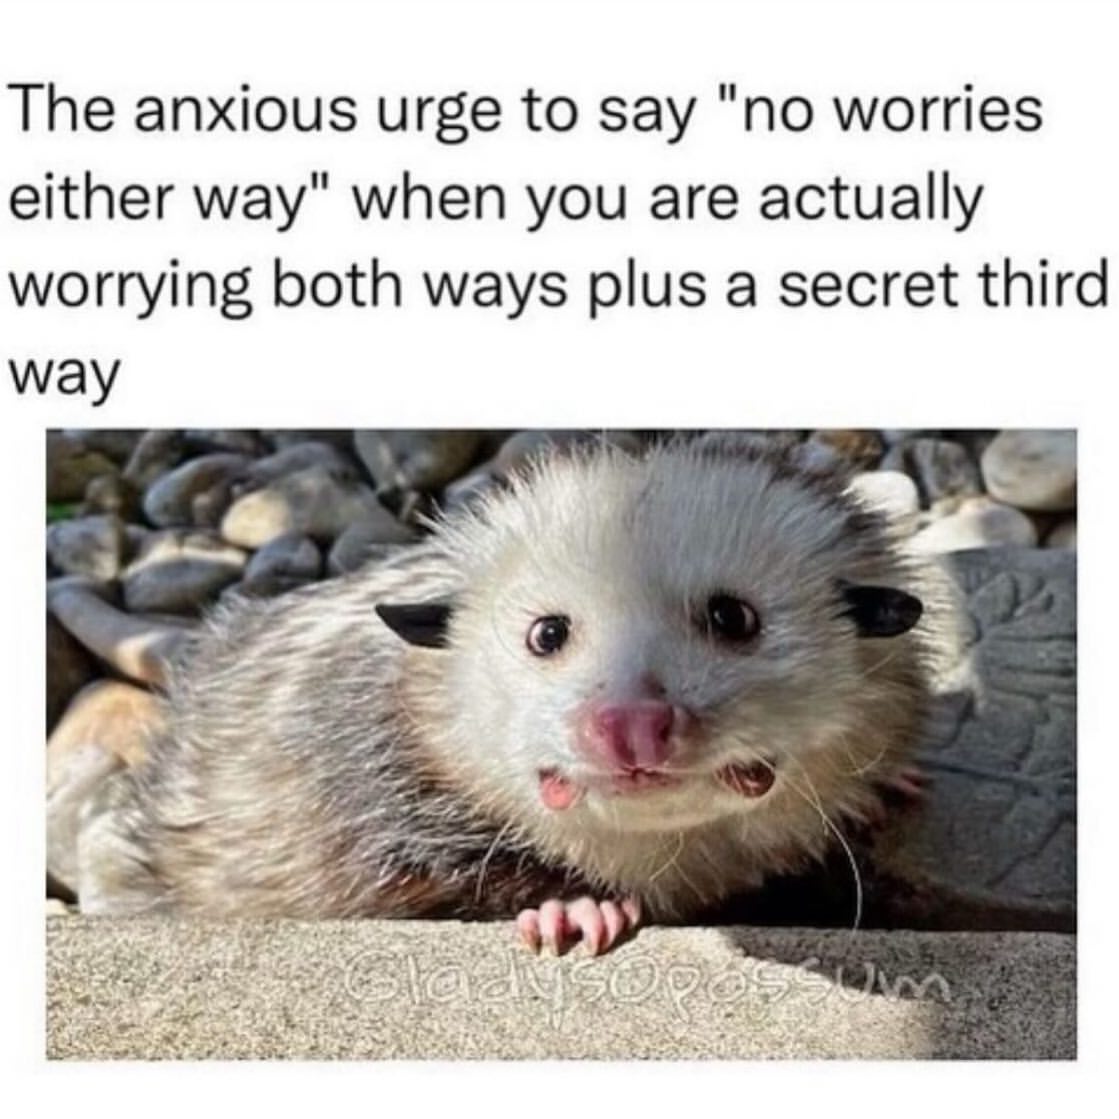 The anxious urge to say "no worries either way" when you are actually worrying both ways plus a secret third way.